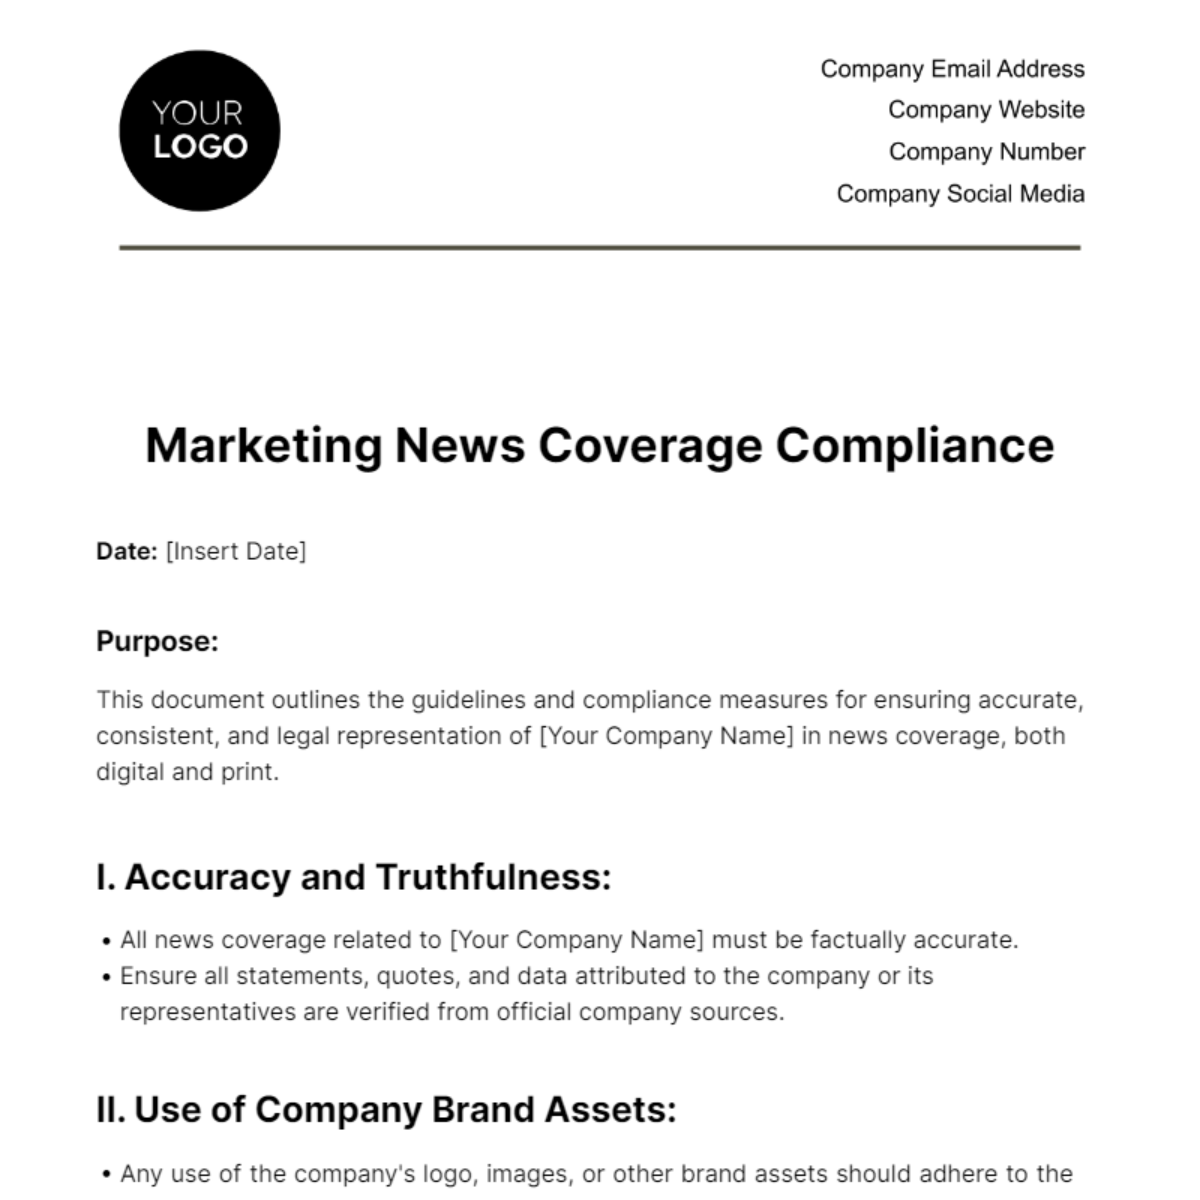 Marketing News Coverage Compliance Template